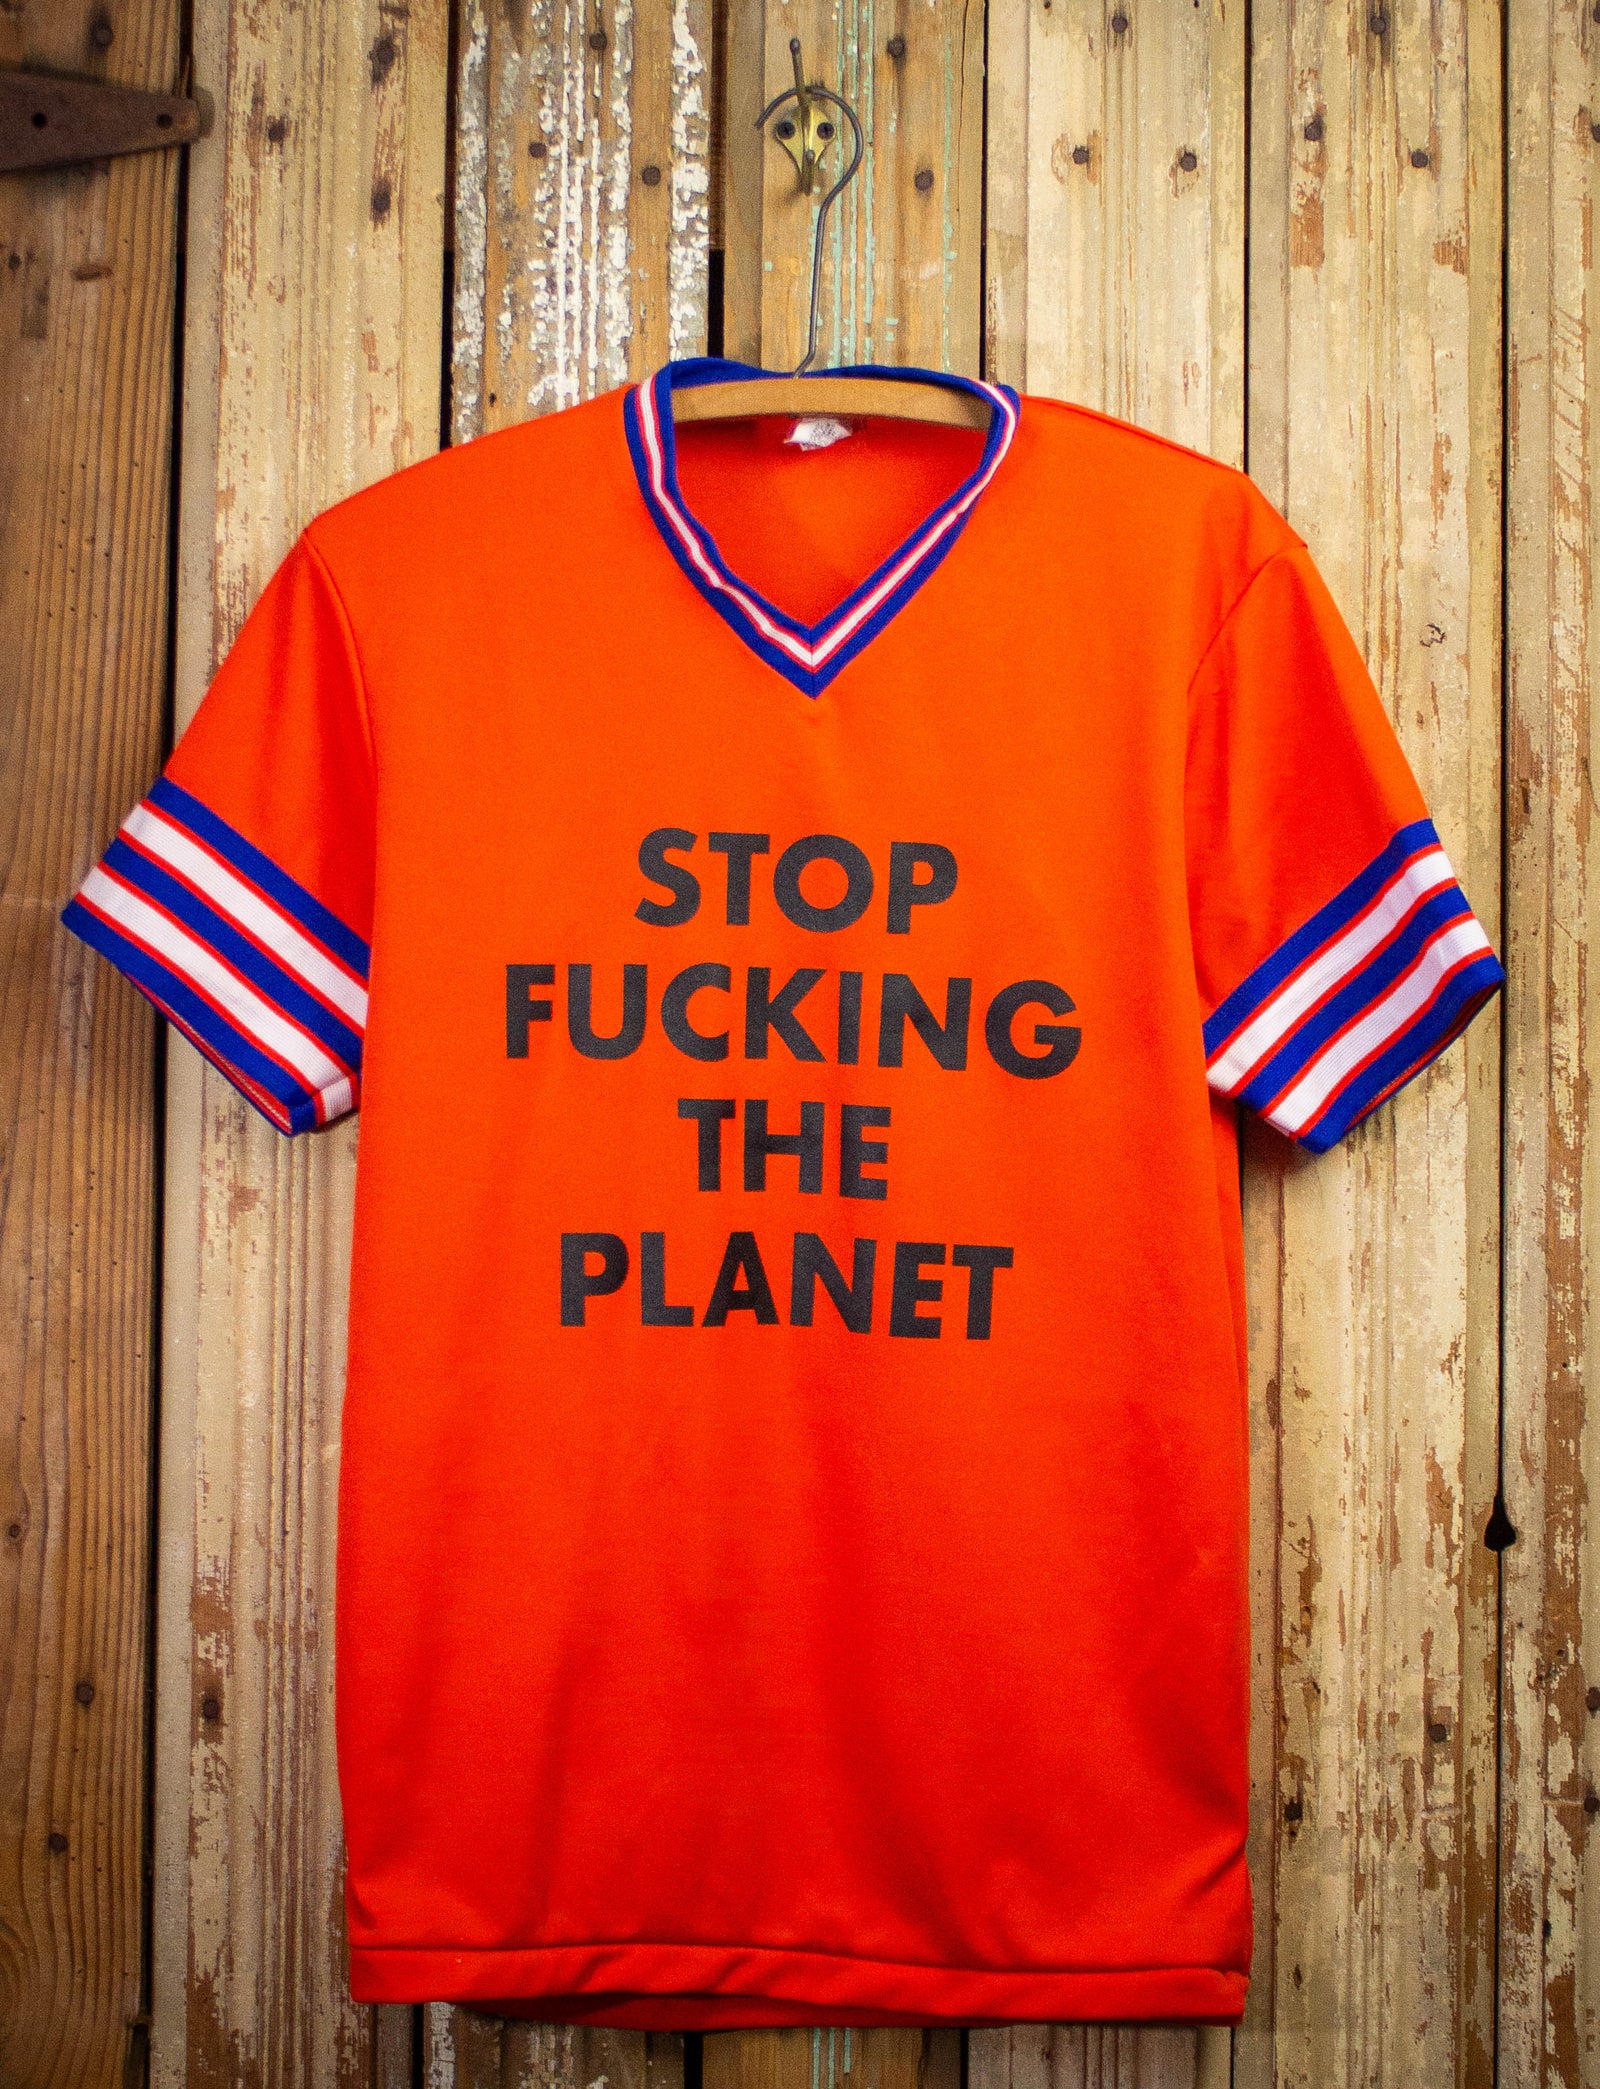 Stop Fucking The Planet Jersey Graphic T Shirt Orange and Blue Medium